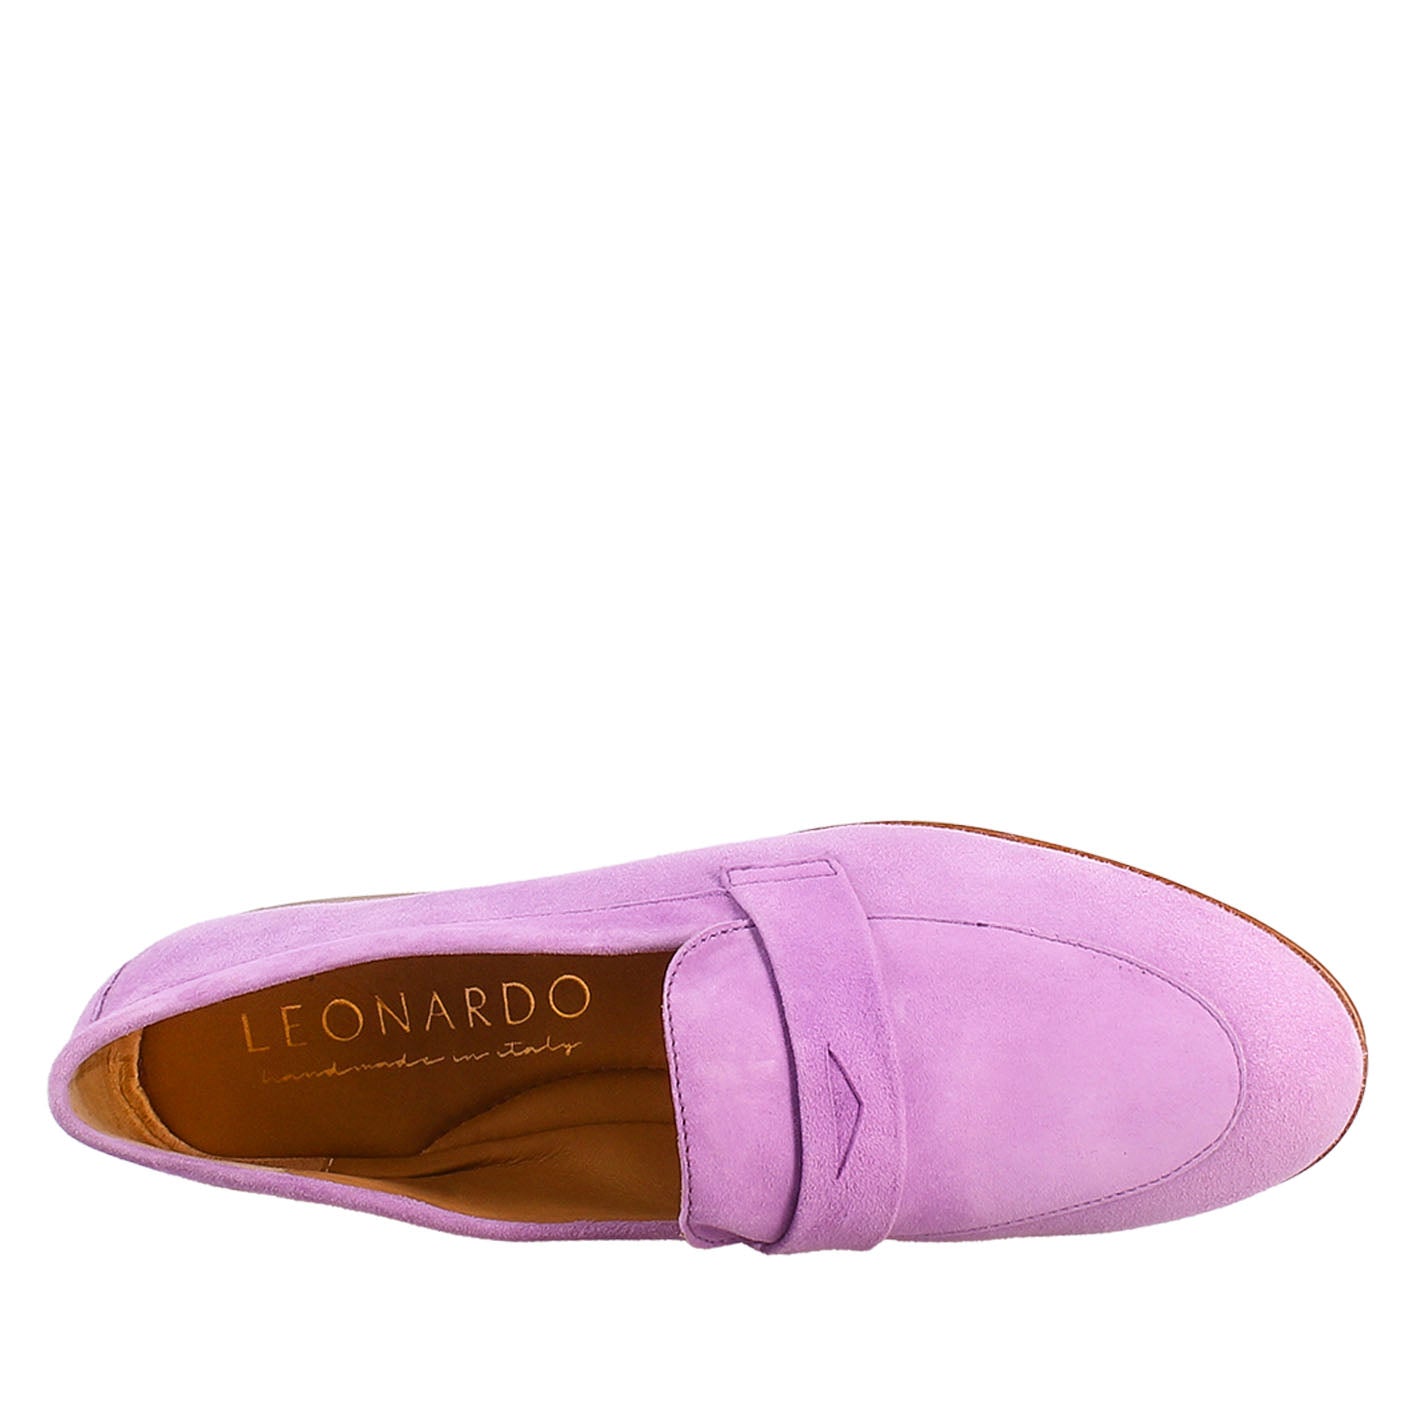 Woman's bag moccasin in lilac suede